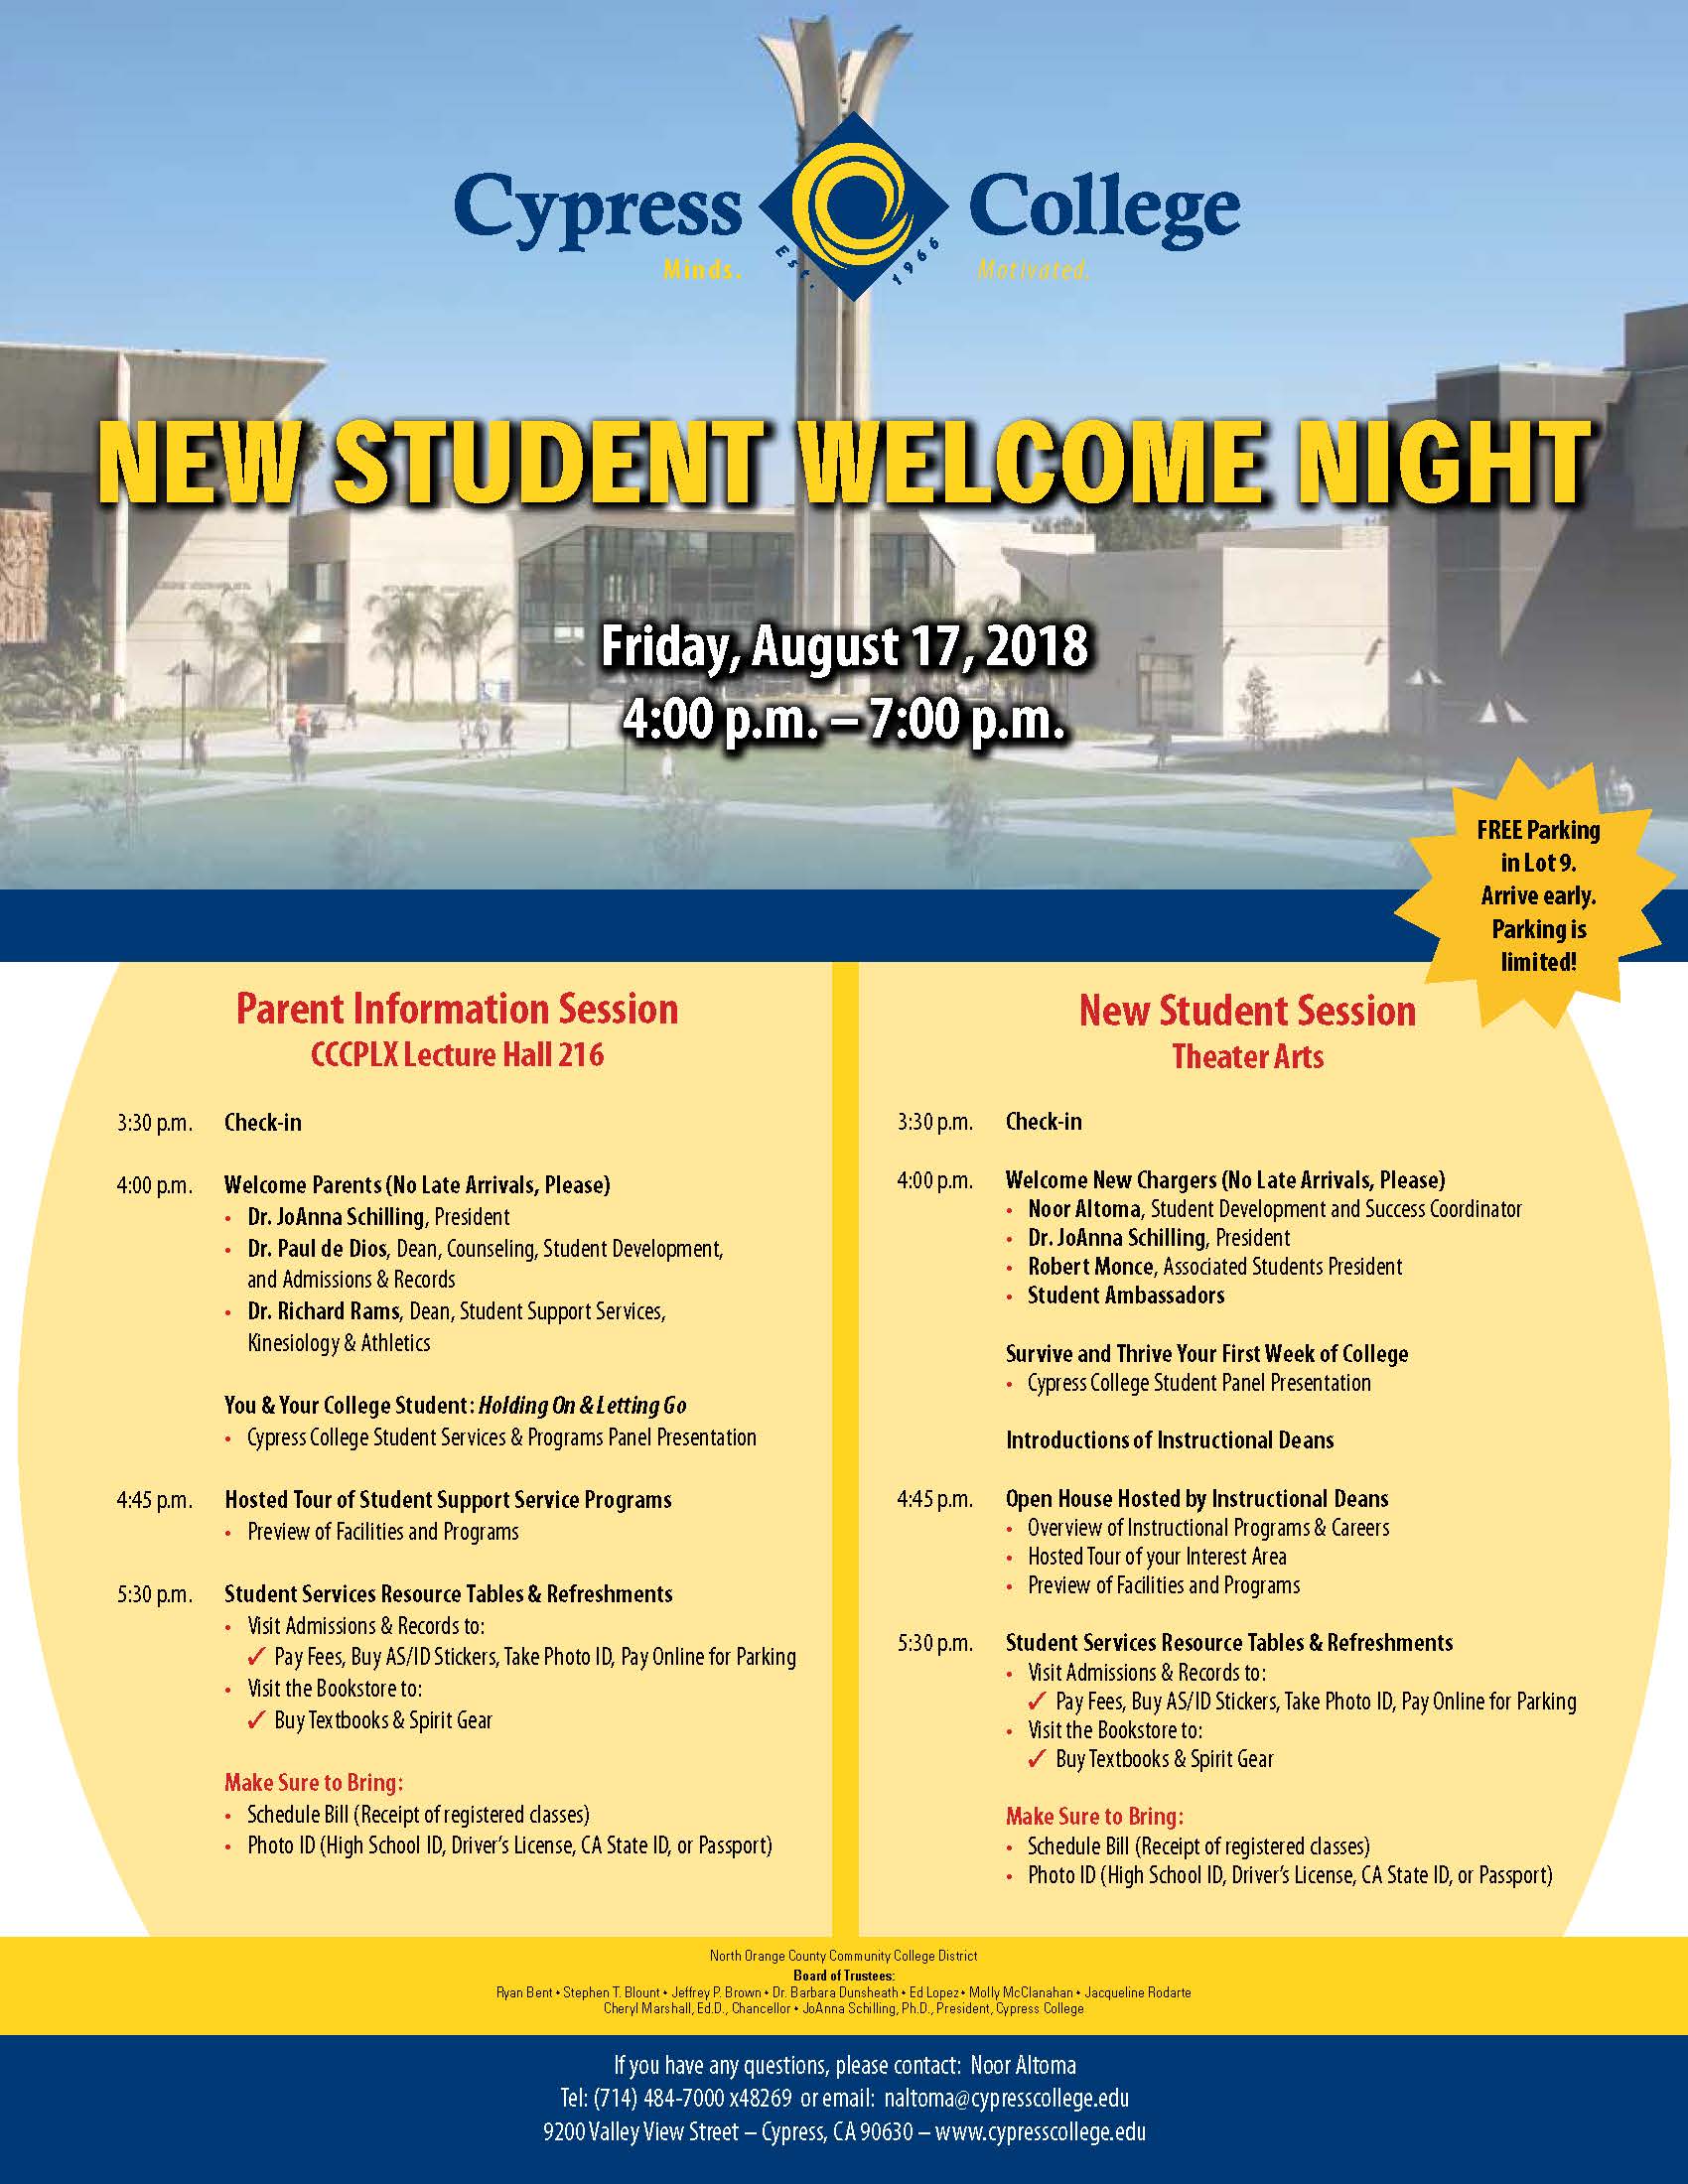 Cypress College New Student Welcome Night flyer.